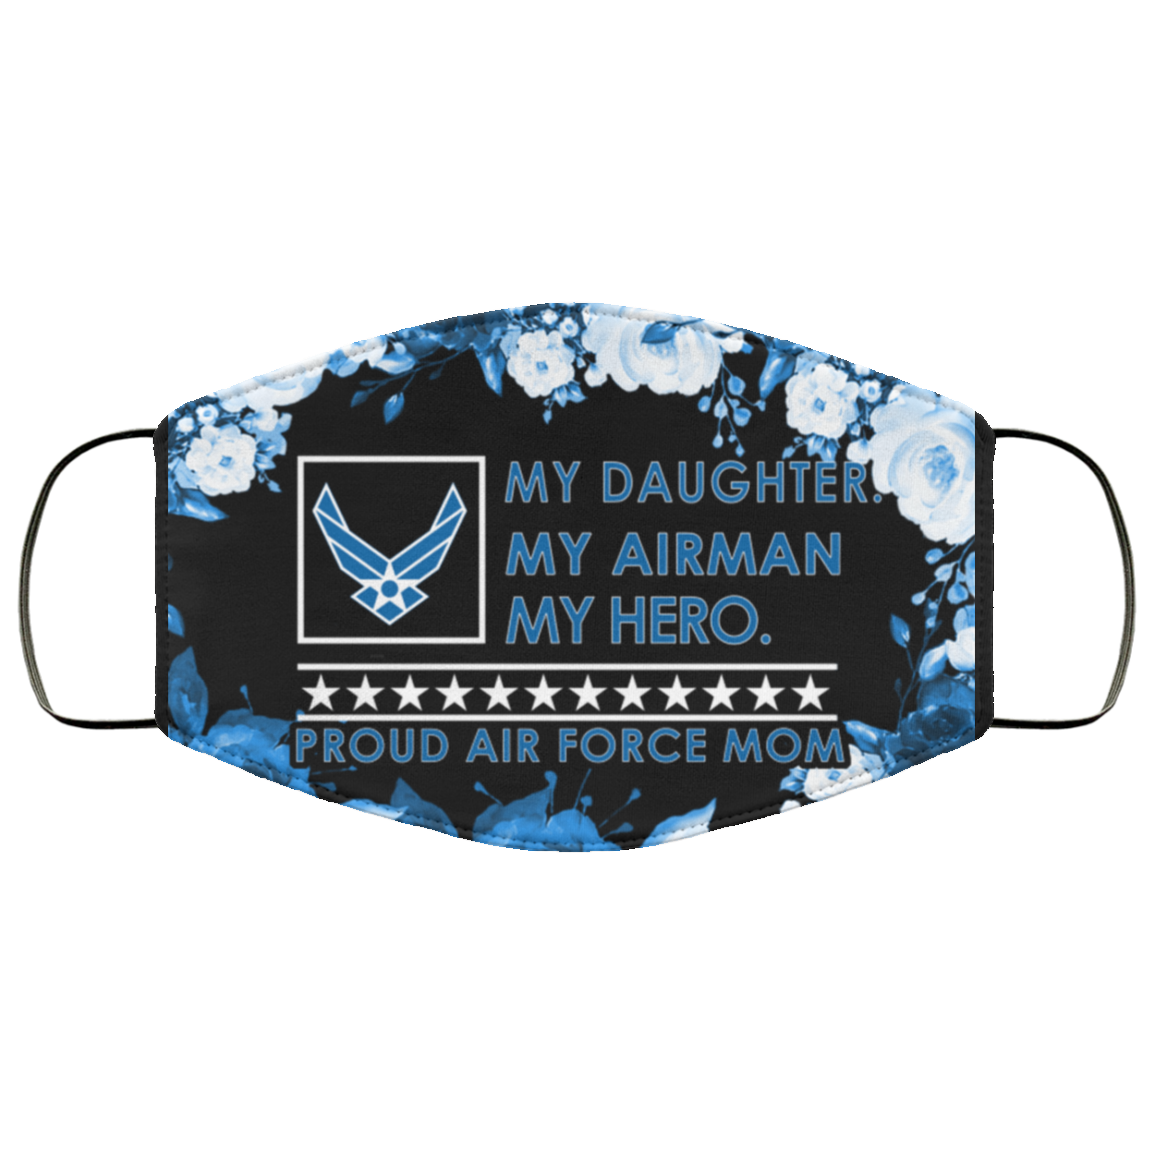 Proud Air Force Mom Face Mask - My Daughter